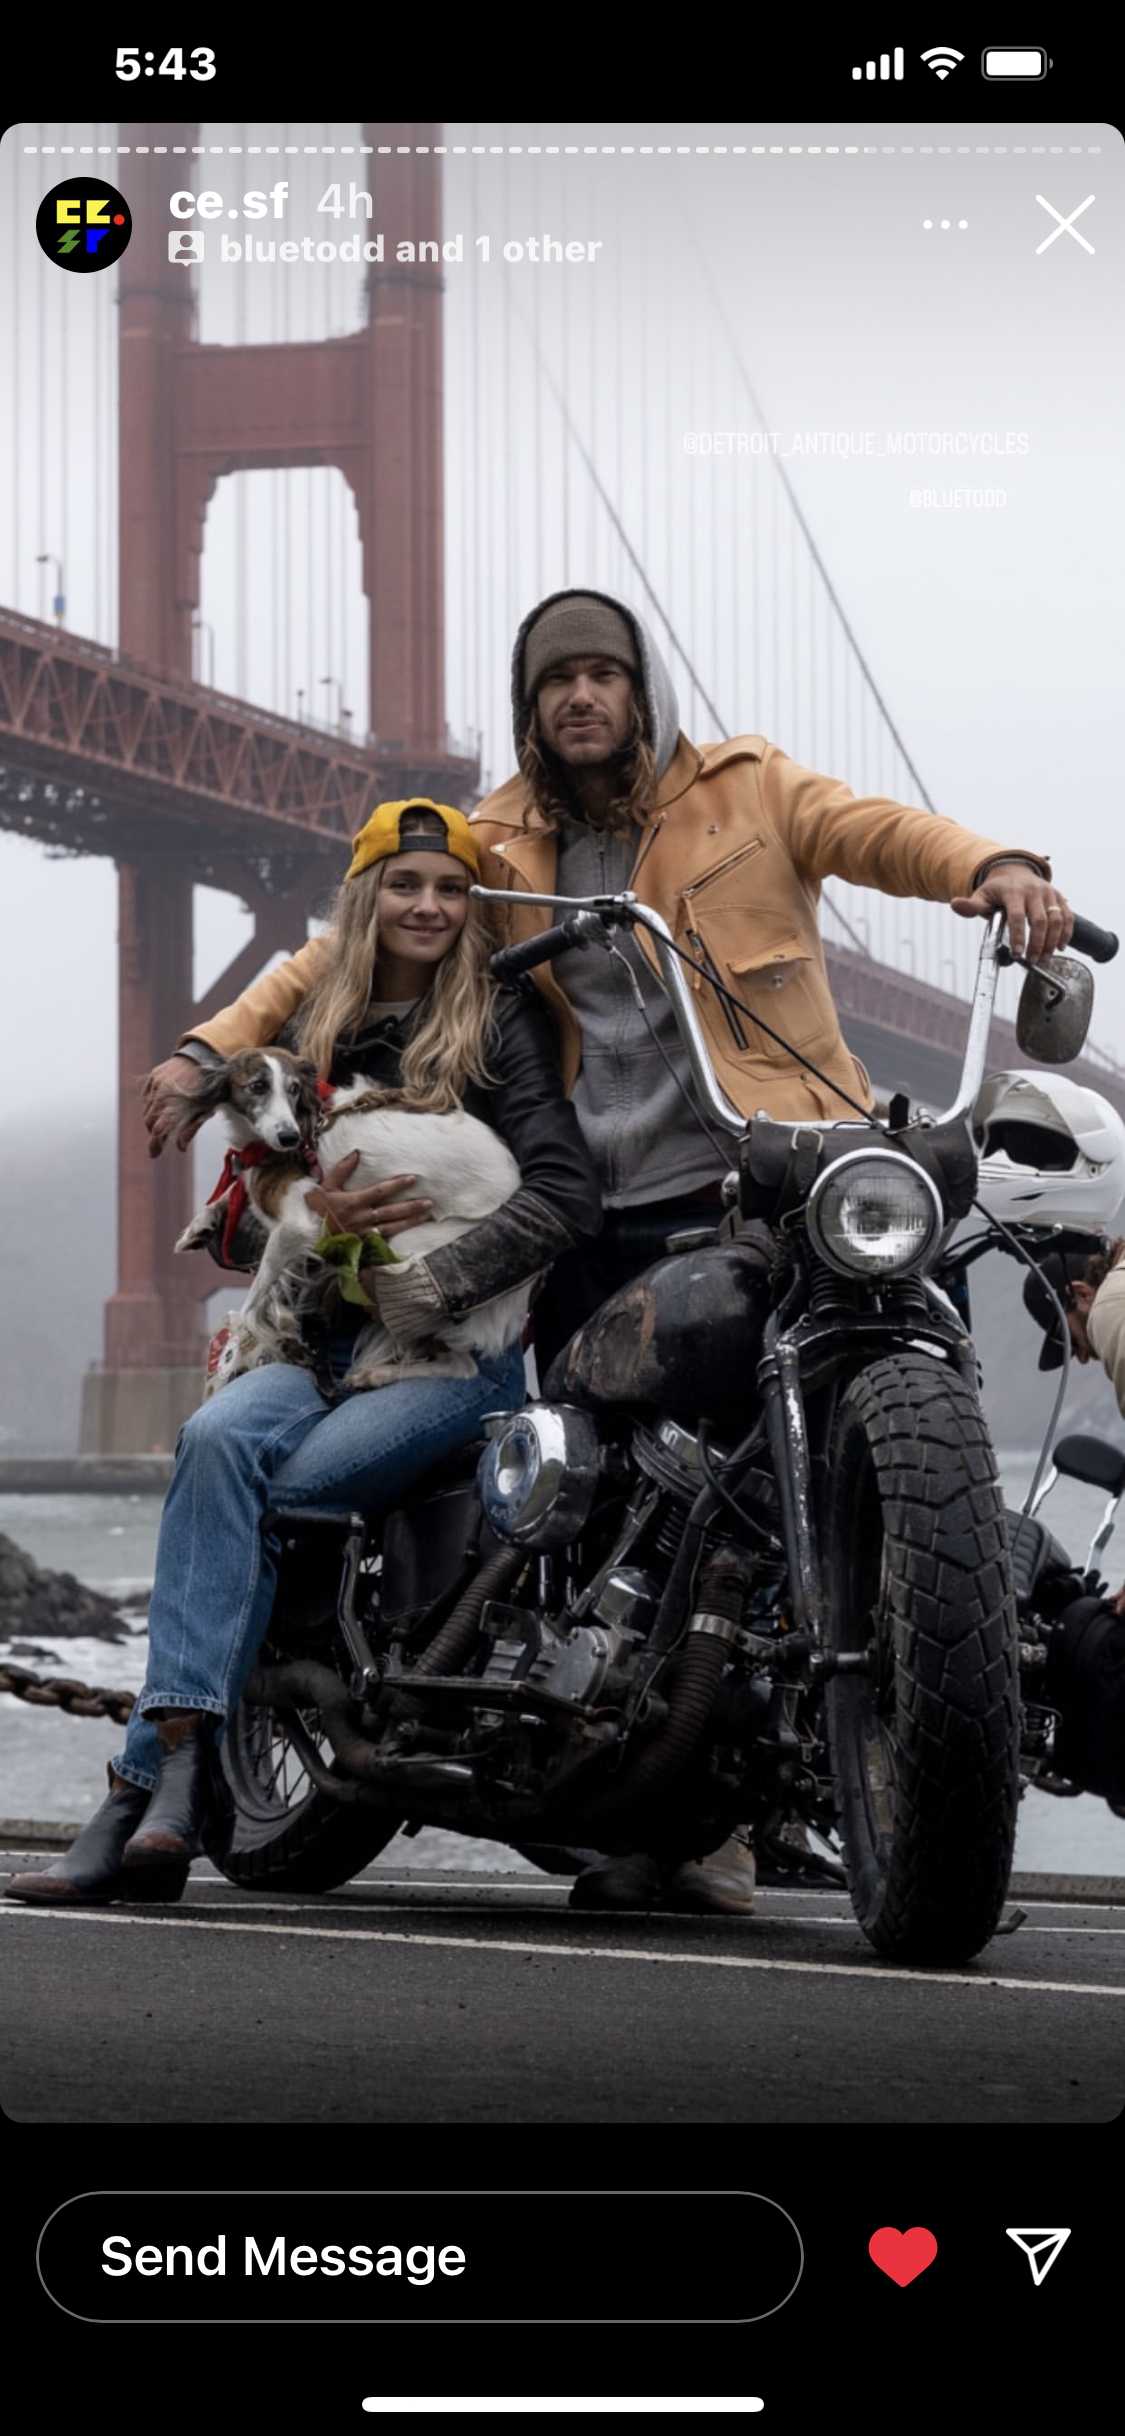 the shop vancouver y2 leather buco horsehide d pocket double riders leather jacket natural 